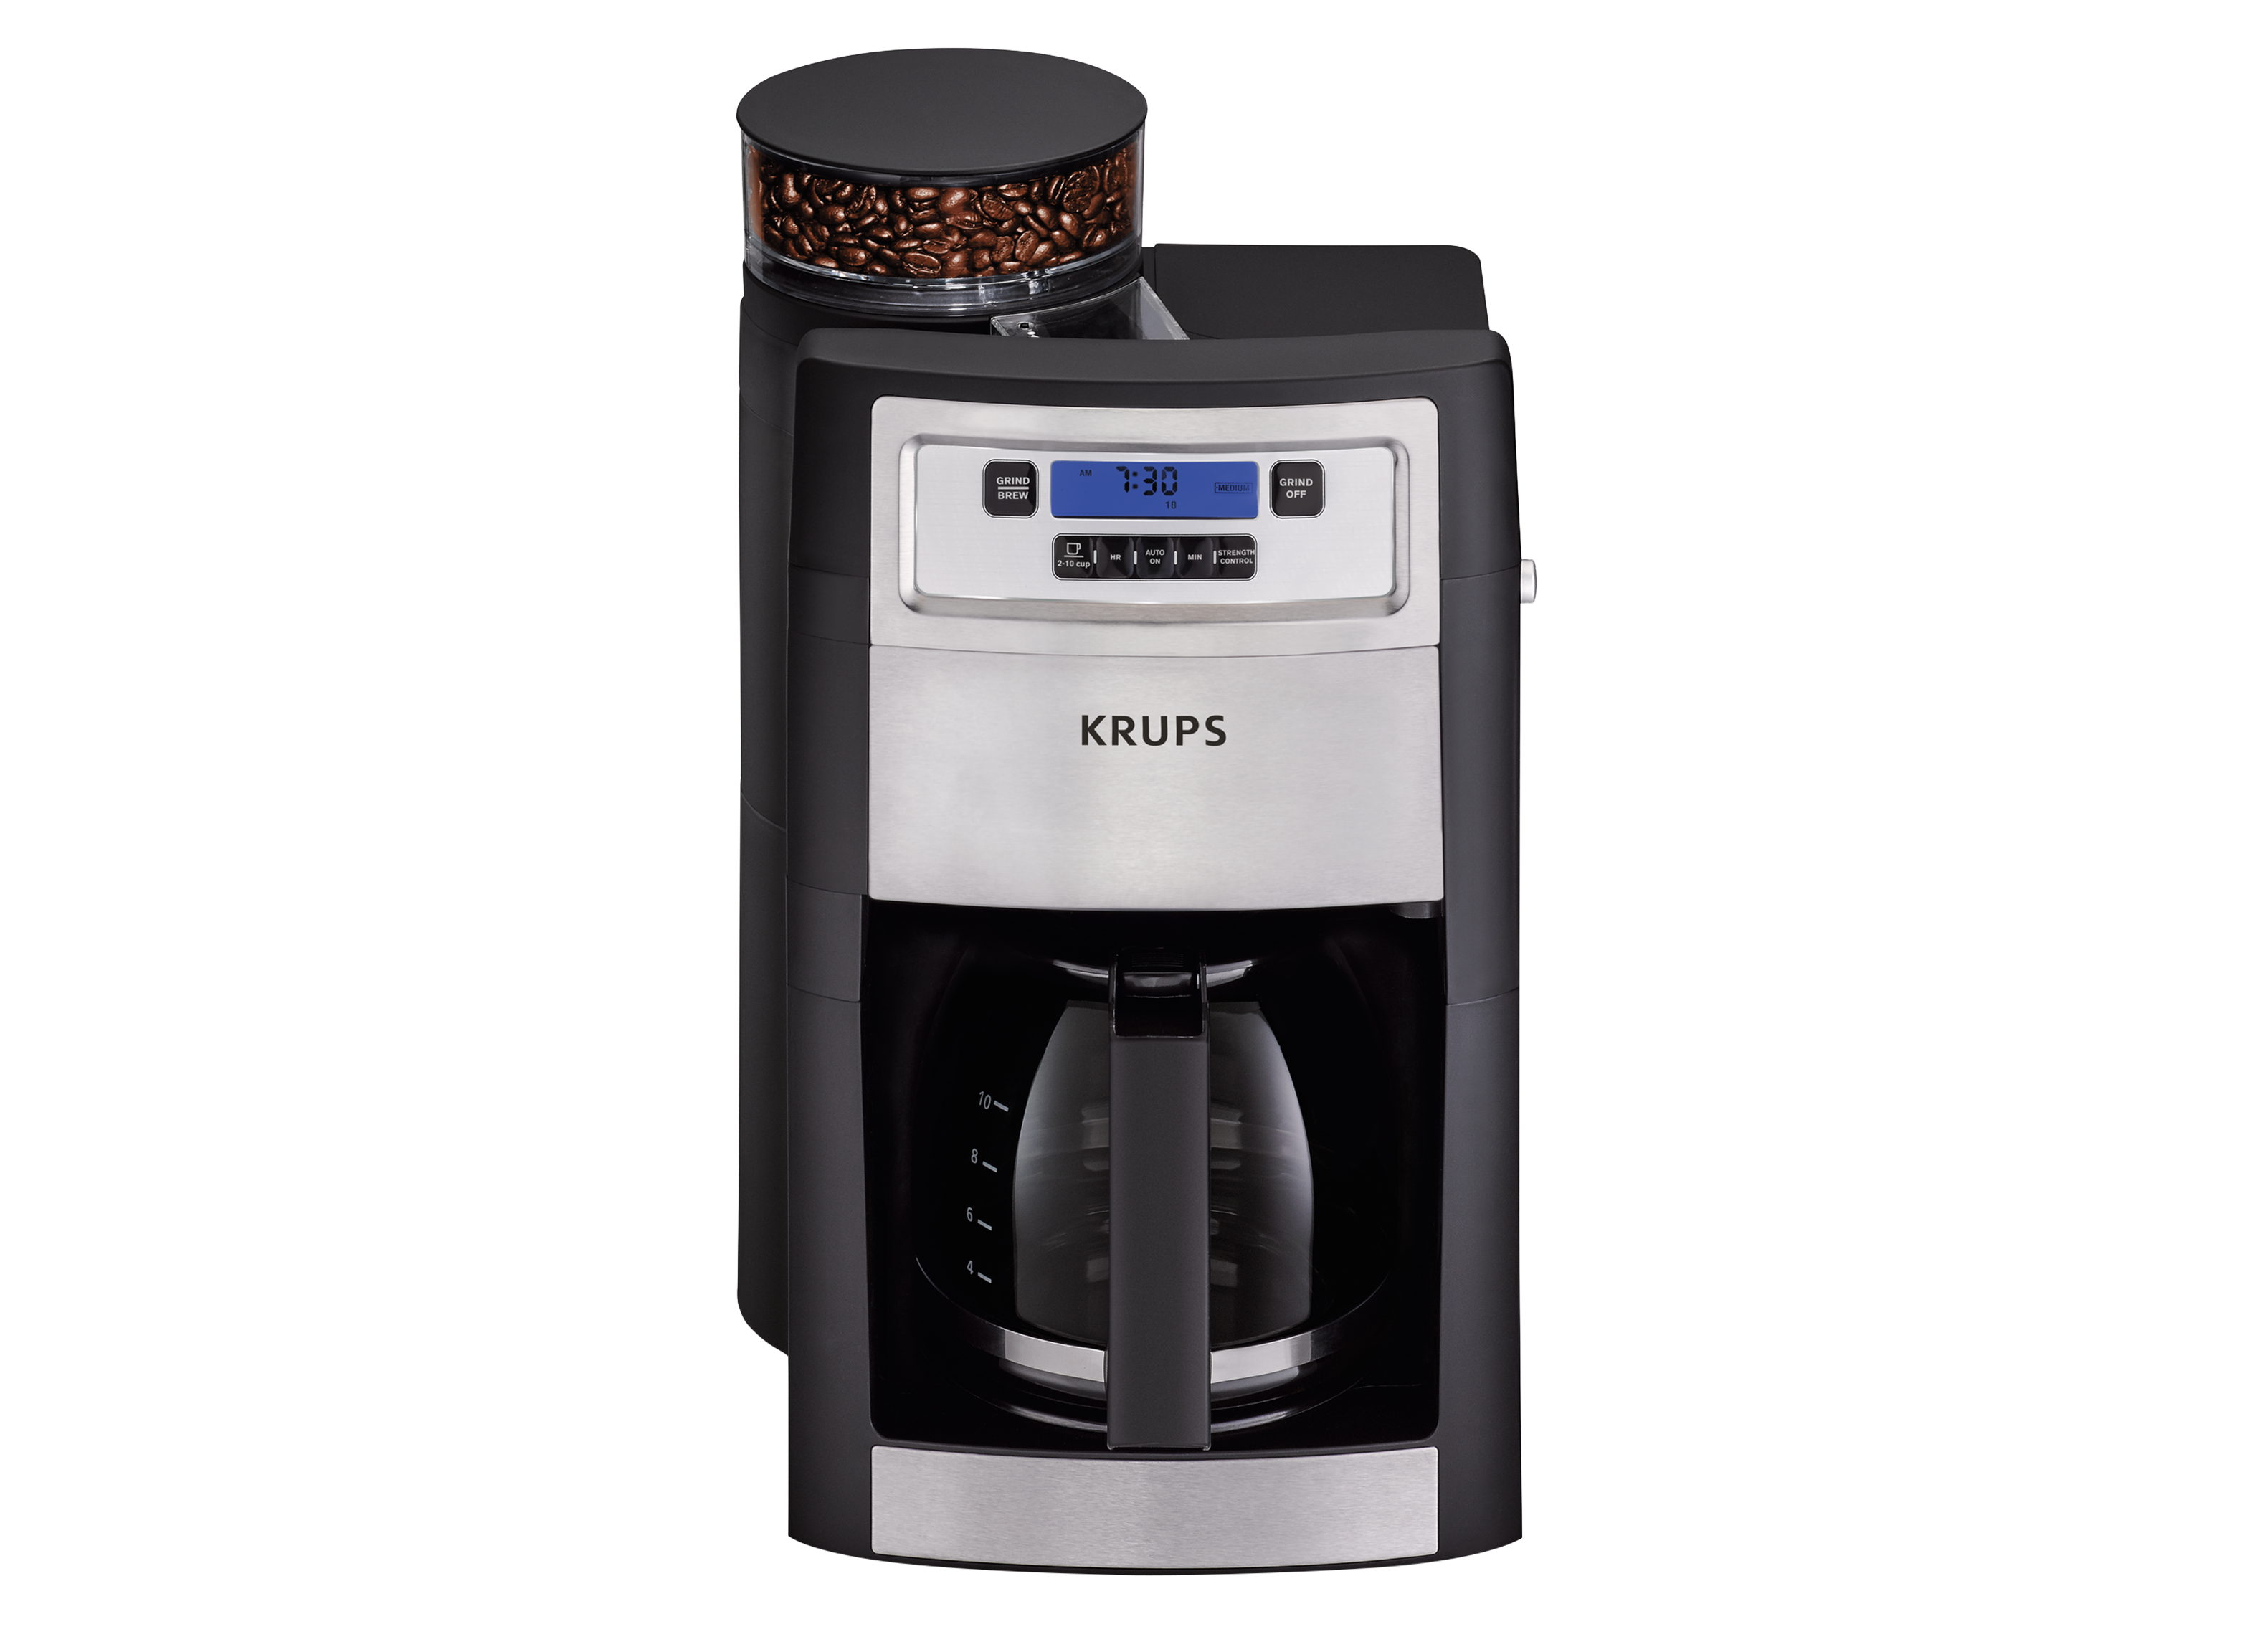 https://crdms.images.consumerreports.org/prod/products/cr/models/398202-drip-coffee-makers-krups-grind-brew-auto-start-km785d50-10005480.png